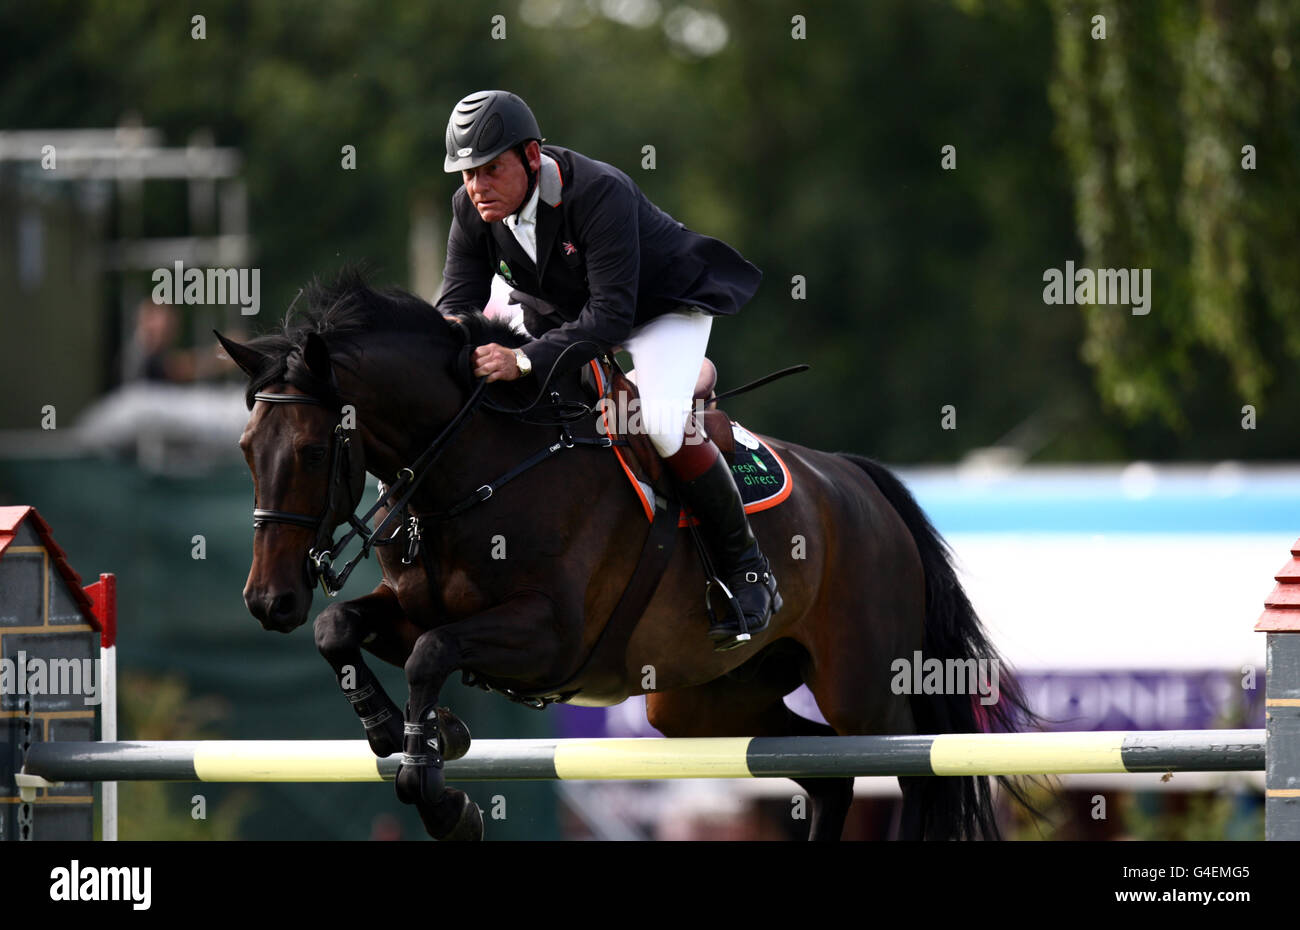 Great Britain's Tim Stockdale rides Fresh Direct Kalico Bay in the Longines King George V Gold Cup during the Longines Royal Hickstead International Horse Show at The All England Jumping Course, Hickstead. Stock Photo